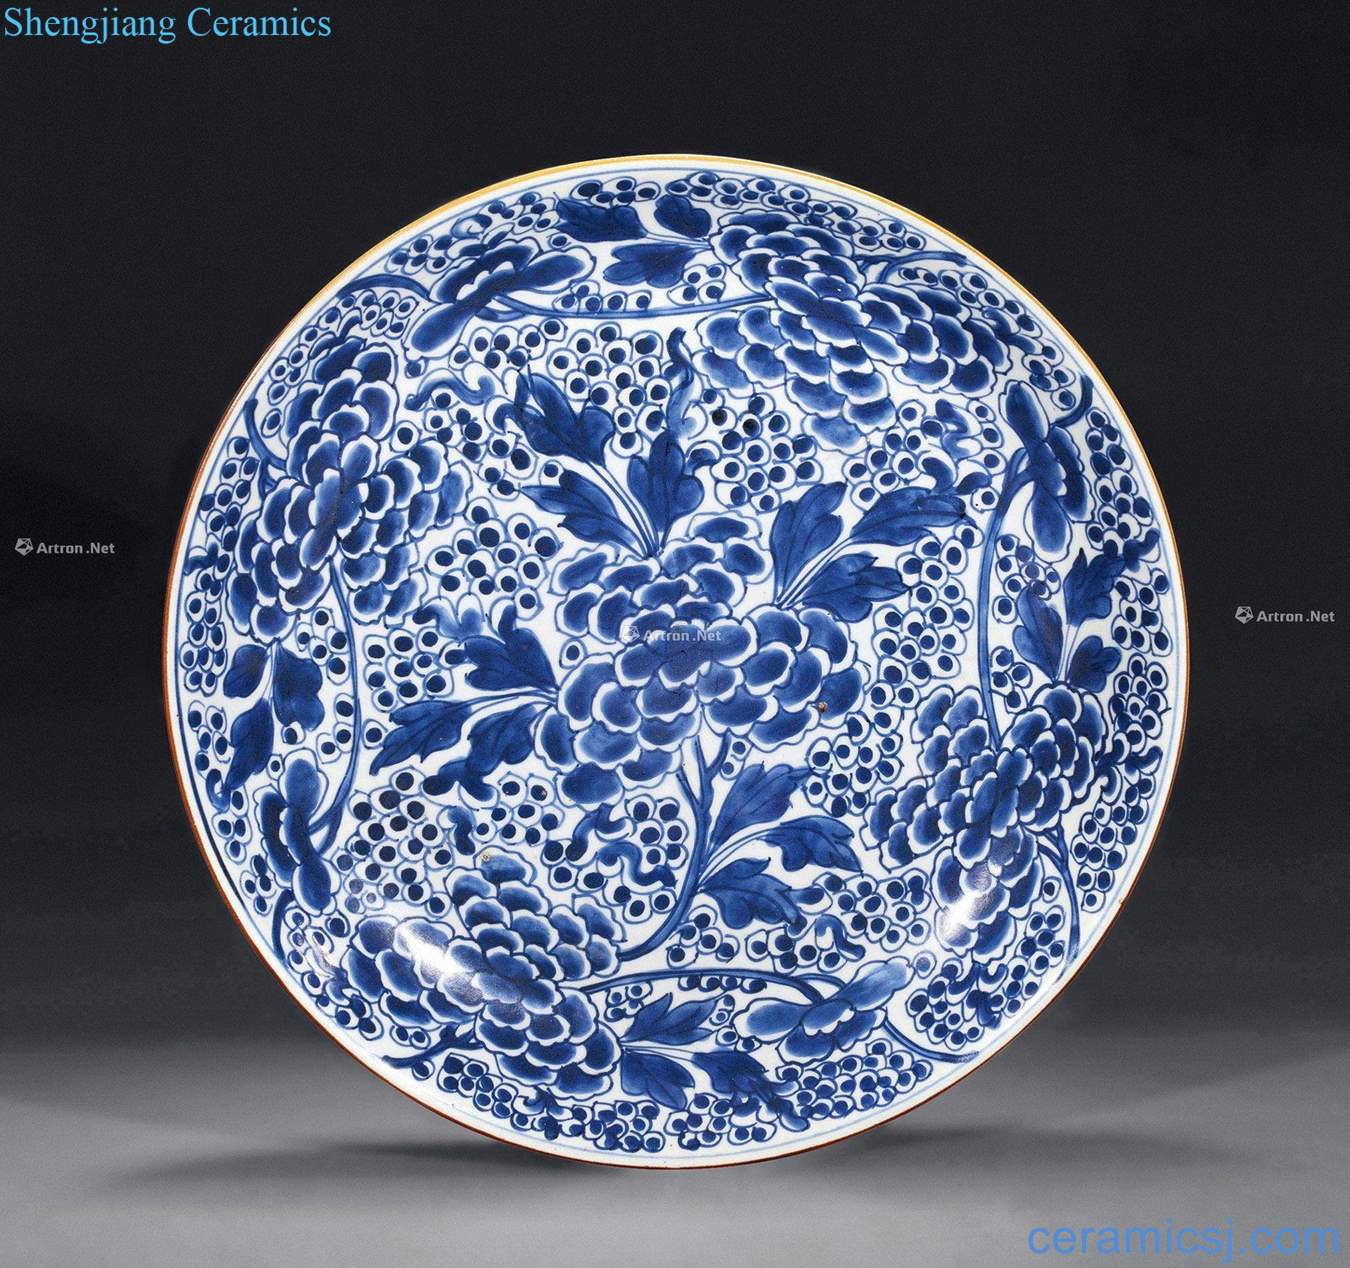 Qing dynasty blue and white flower grain market